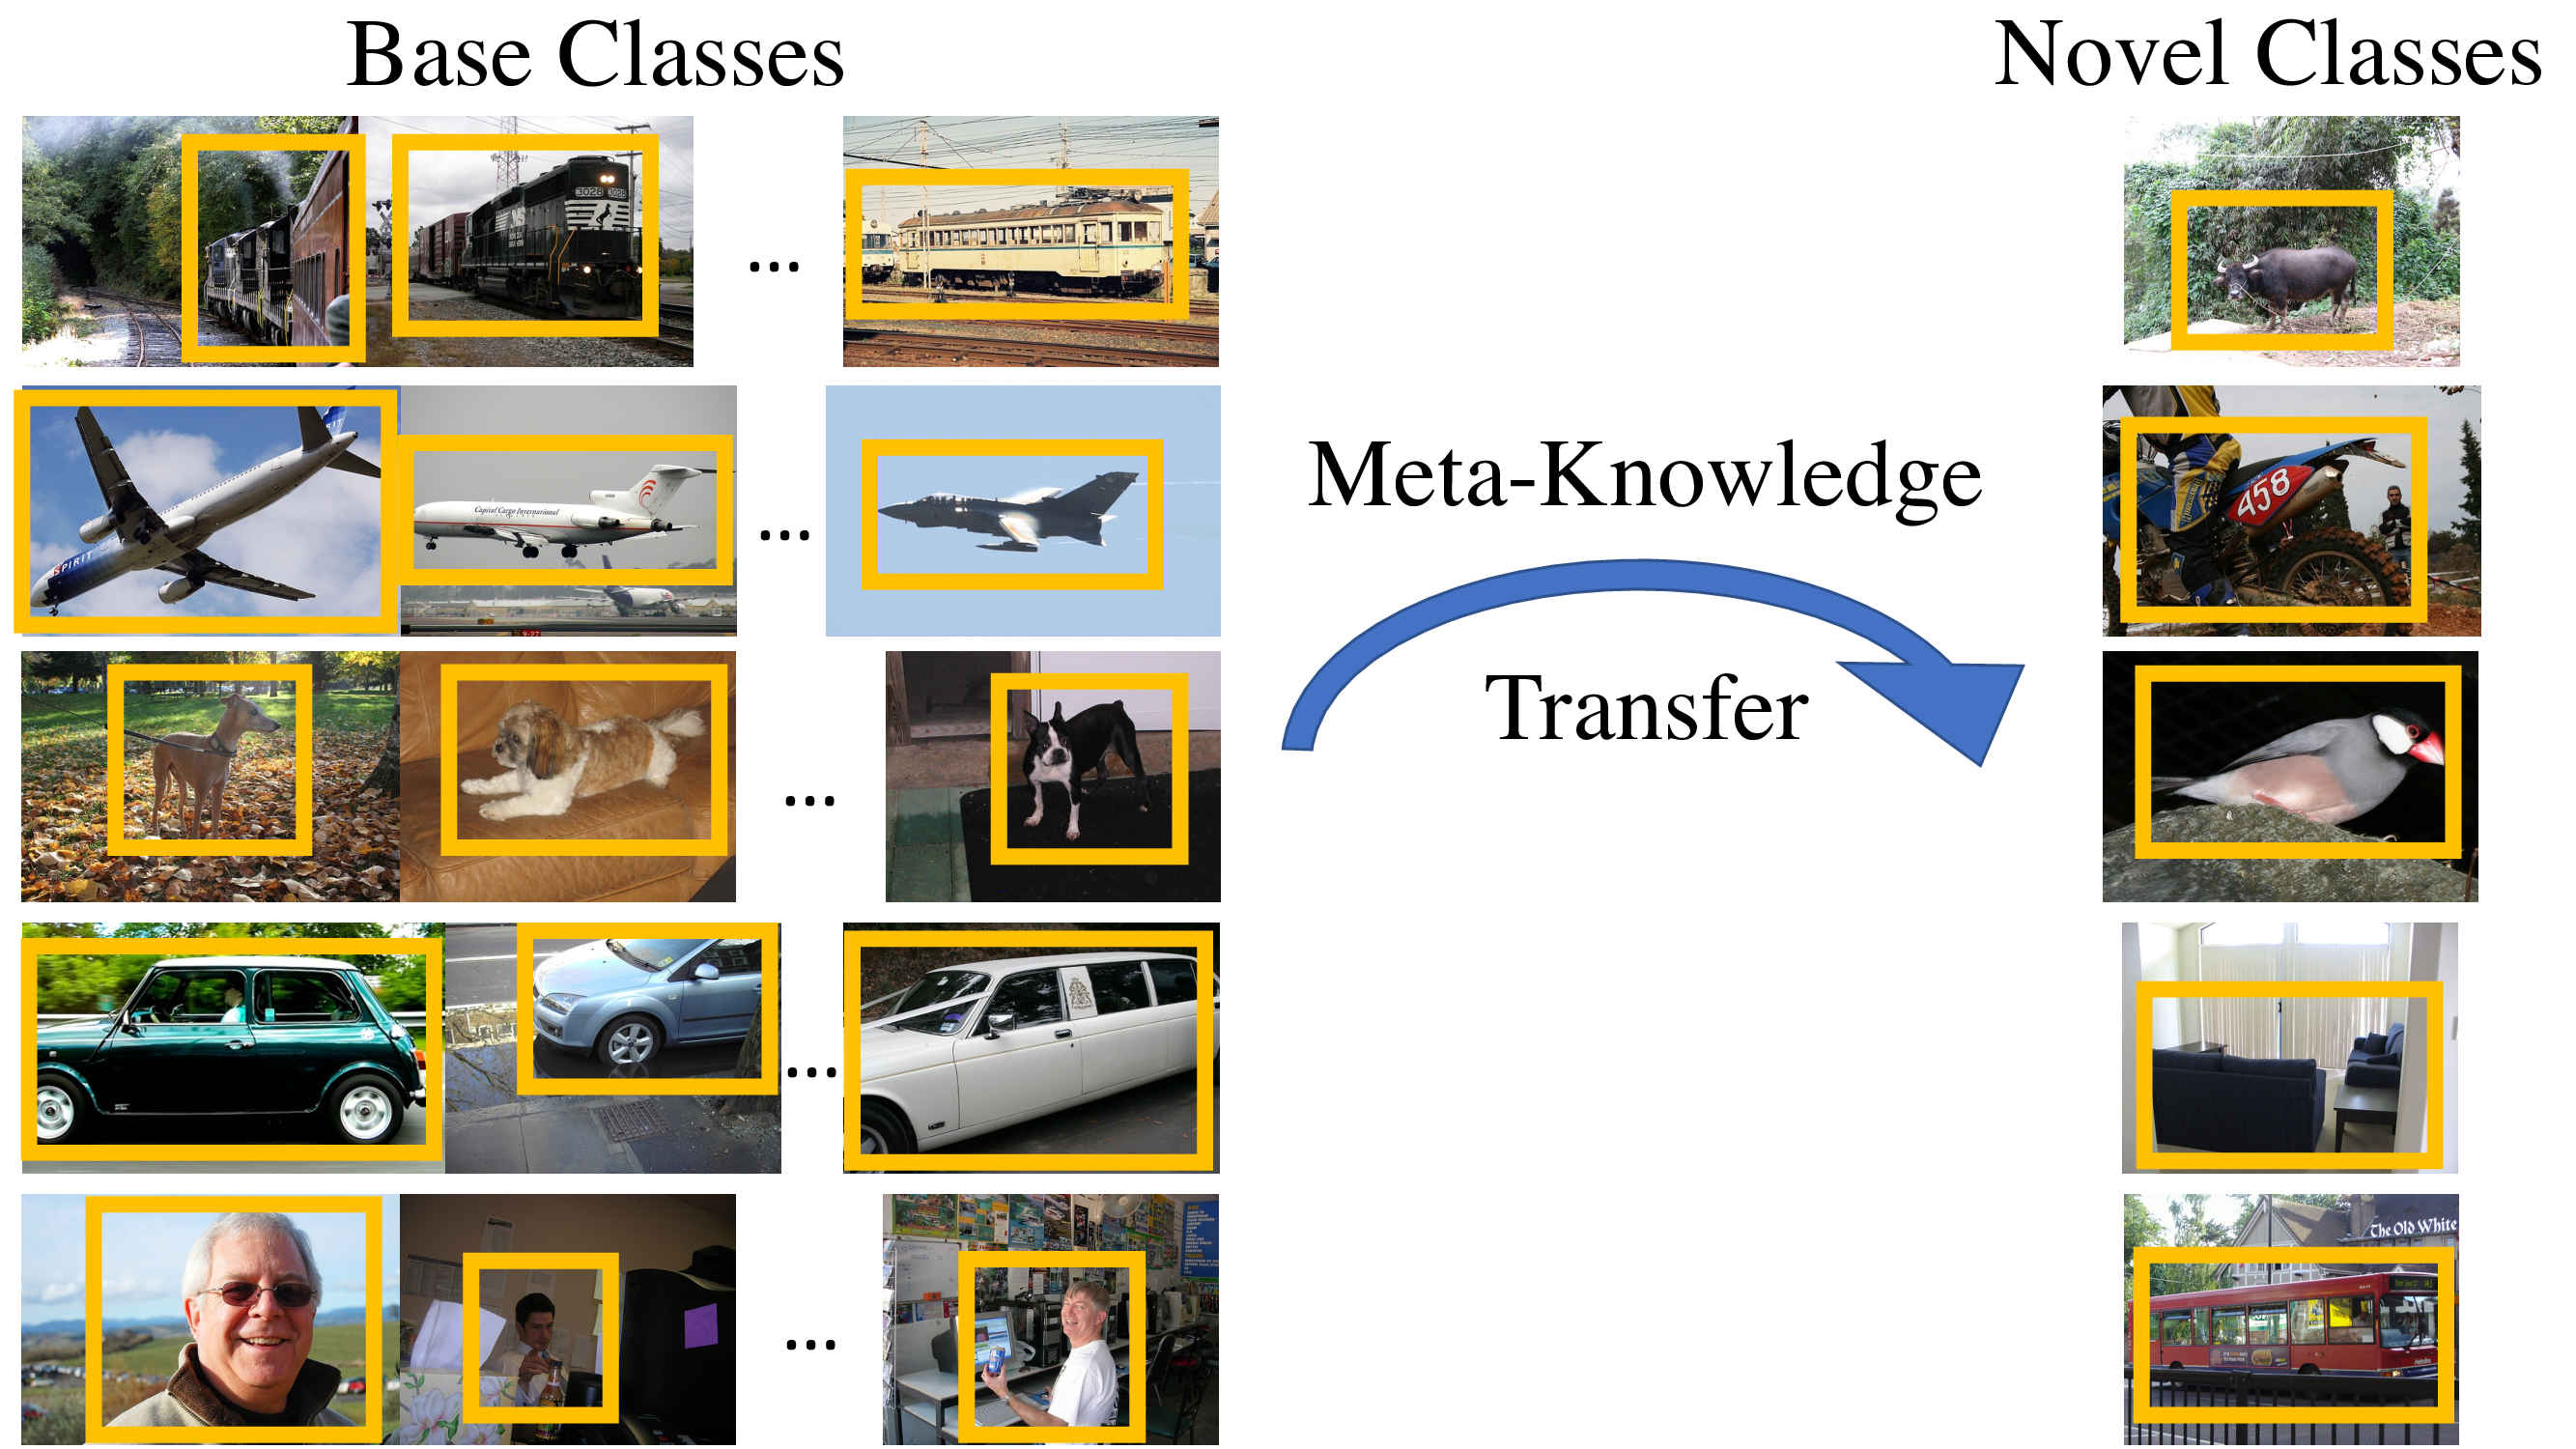 Meta-Learning to Detect Rare Objects